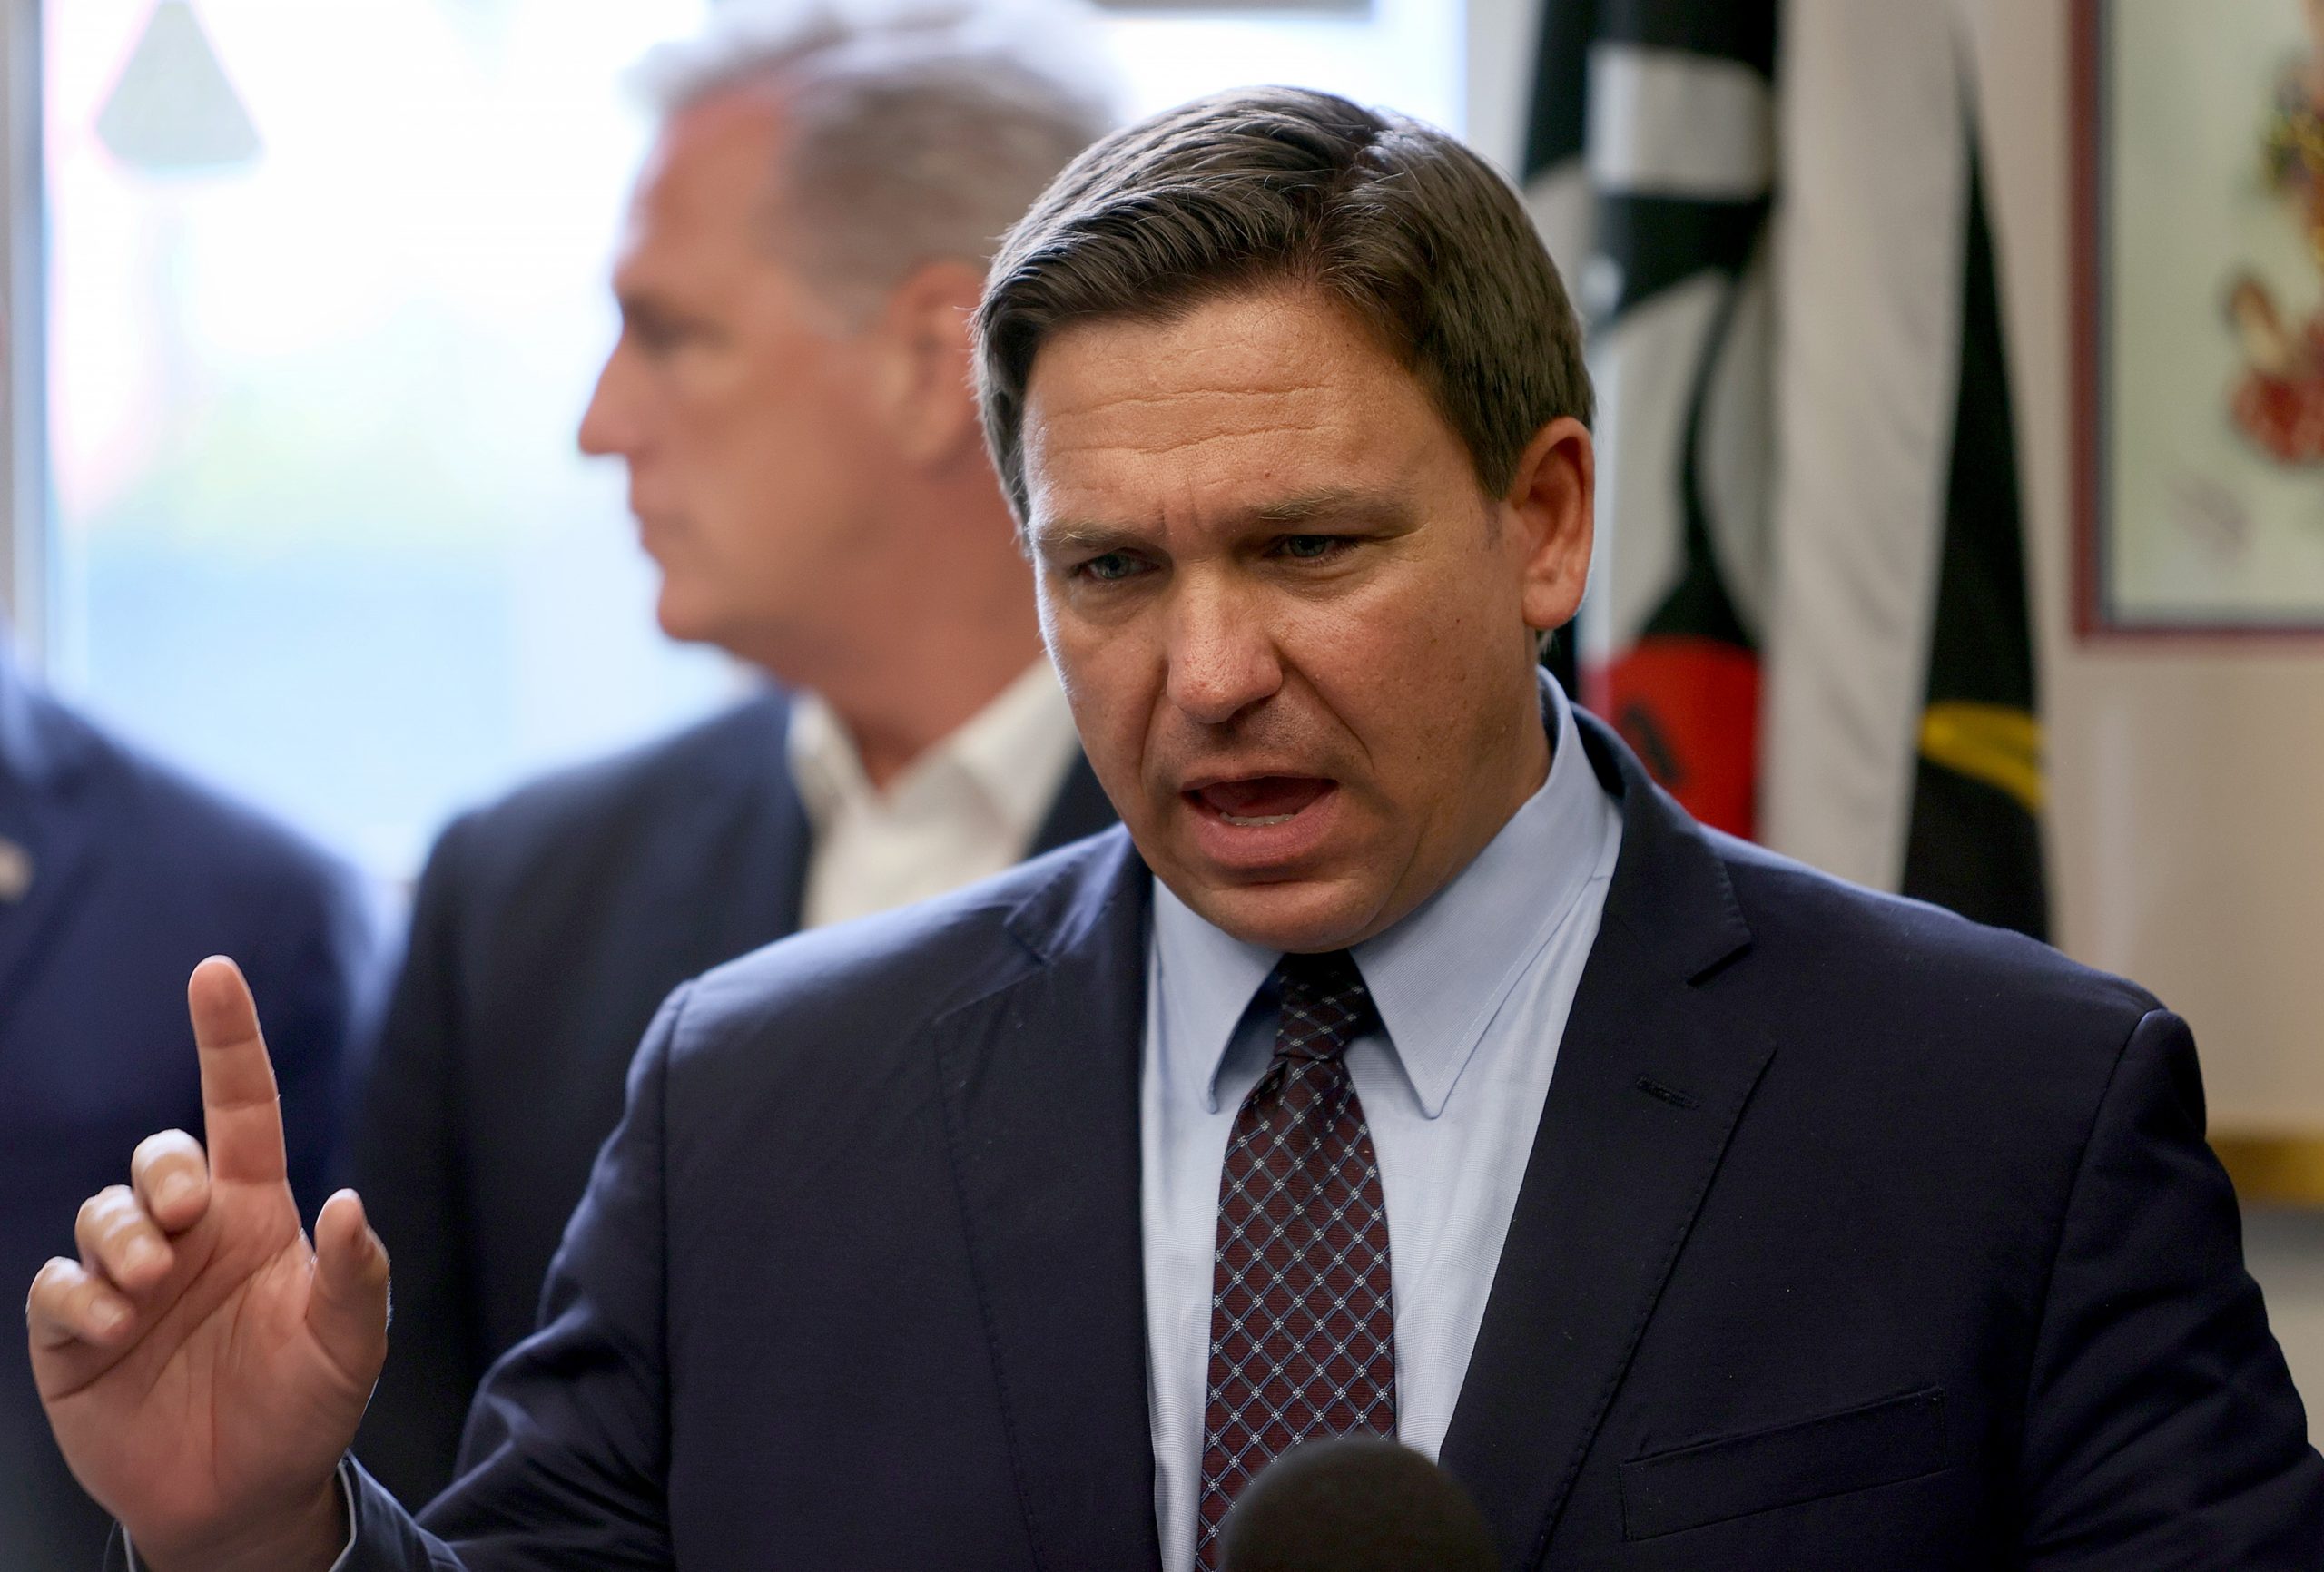 Florida Counties Mandate Masks for Students, Finding Way Around Gov. Ron DeSantis’ Order